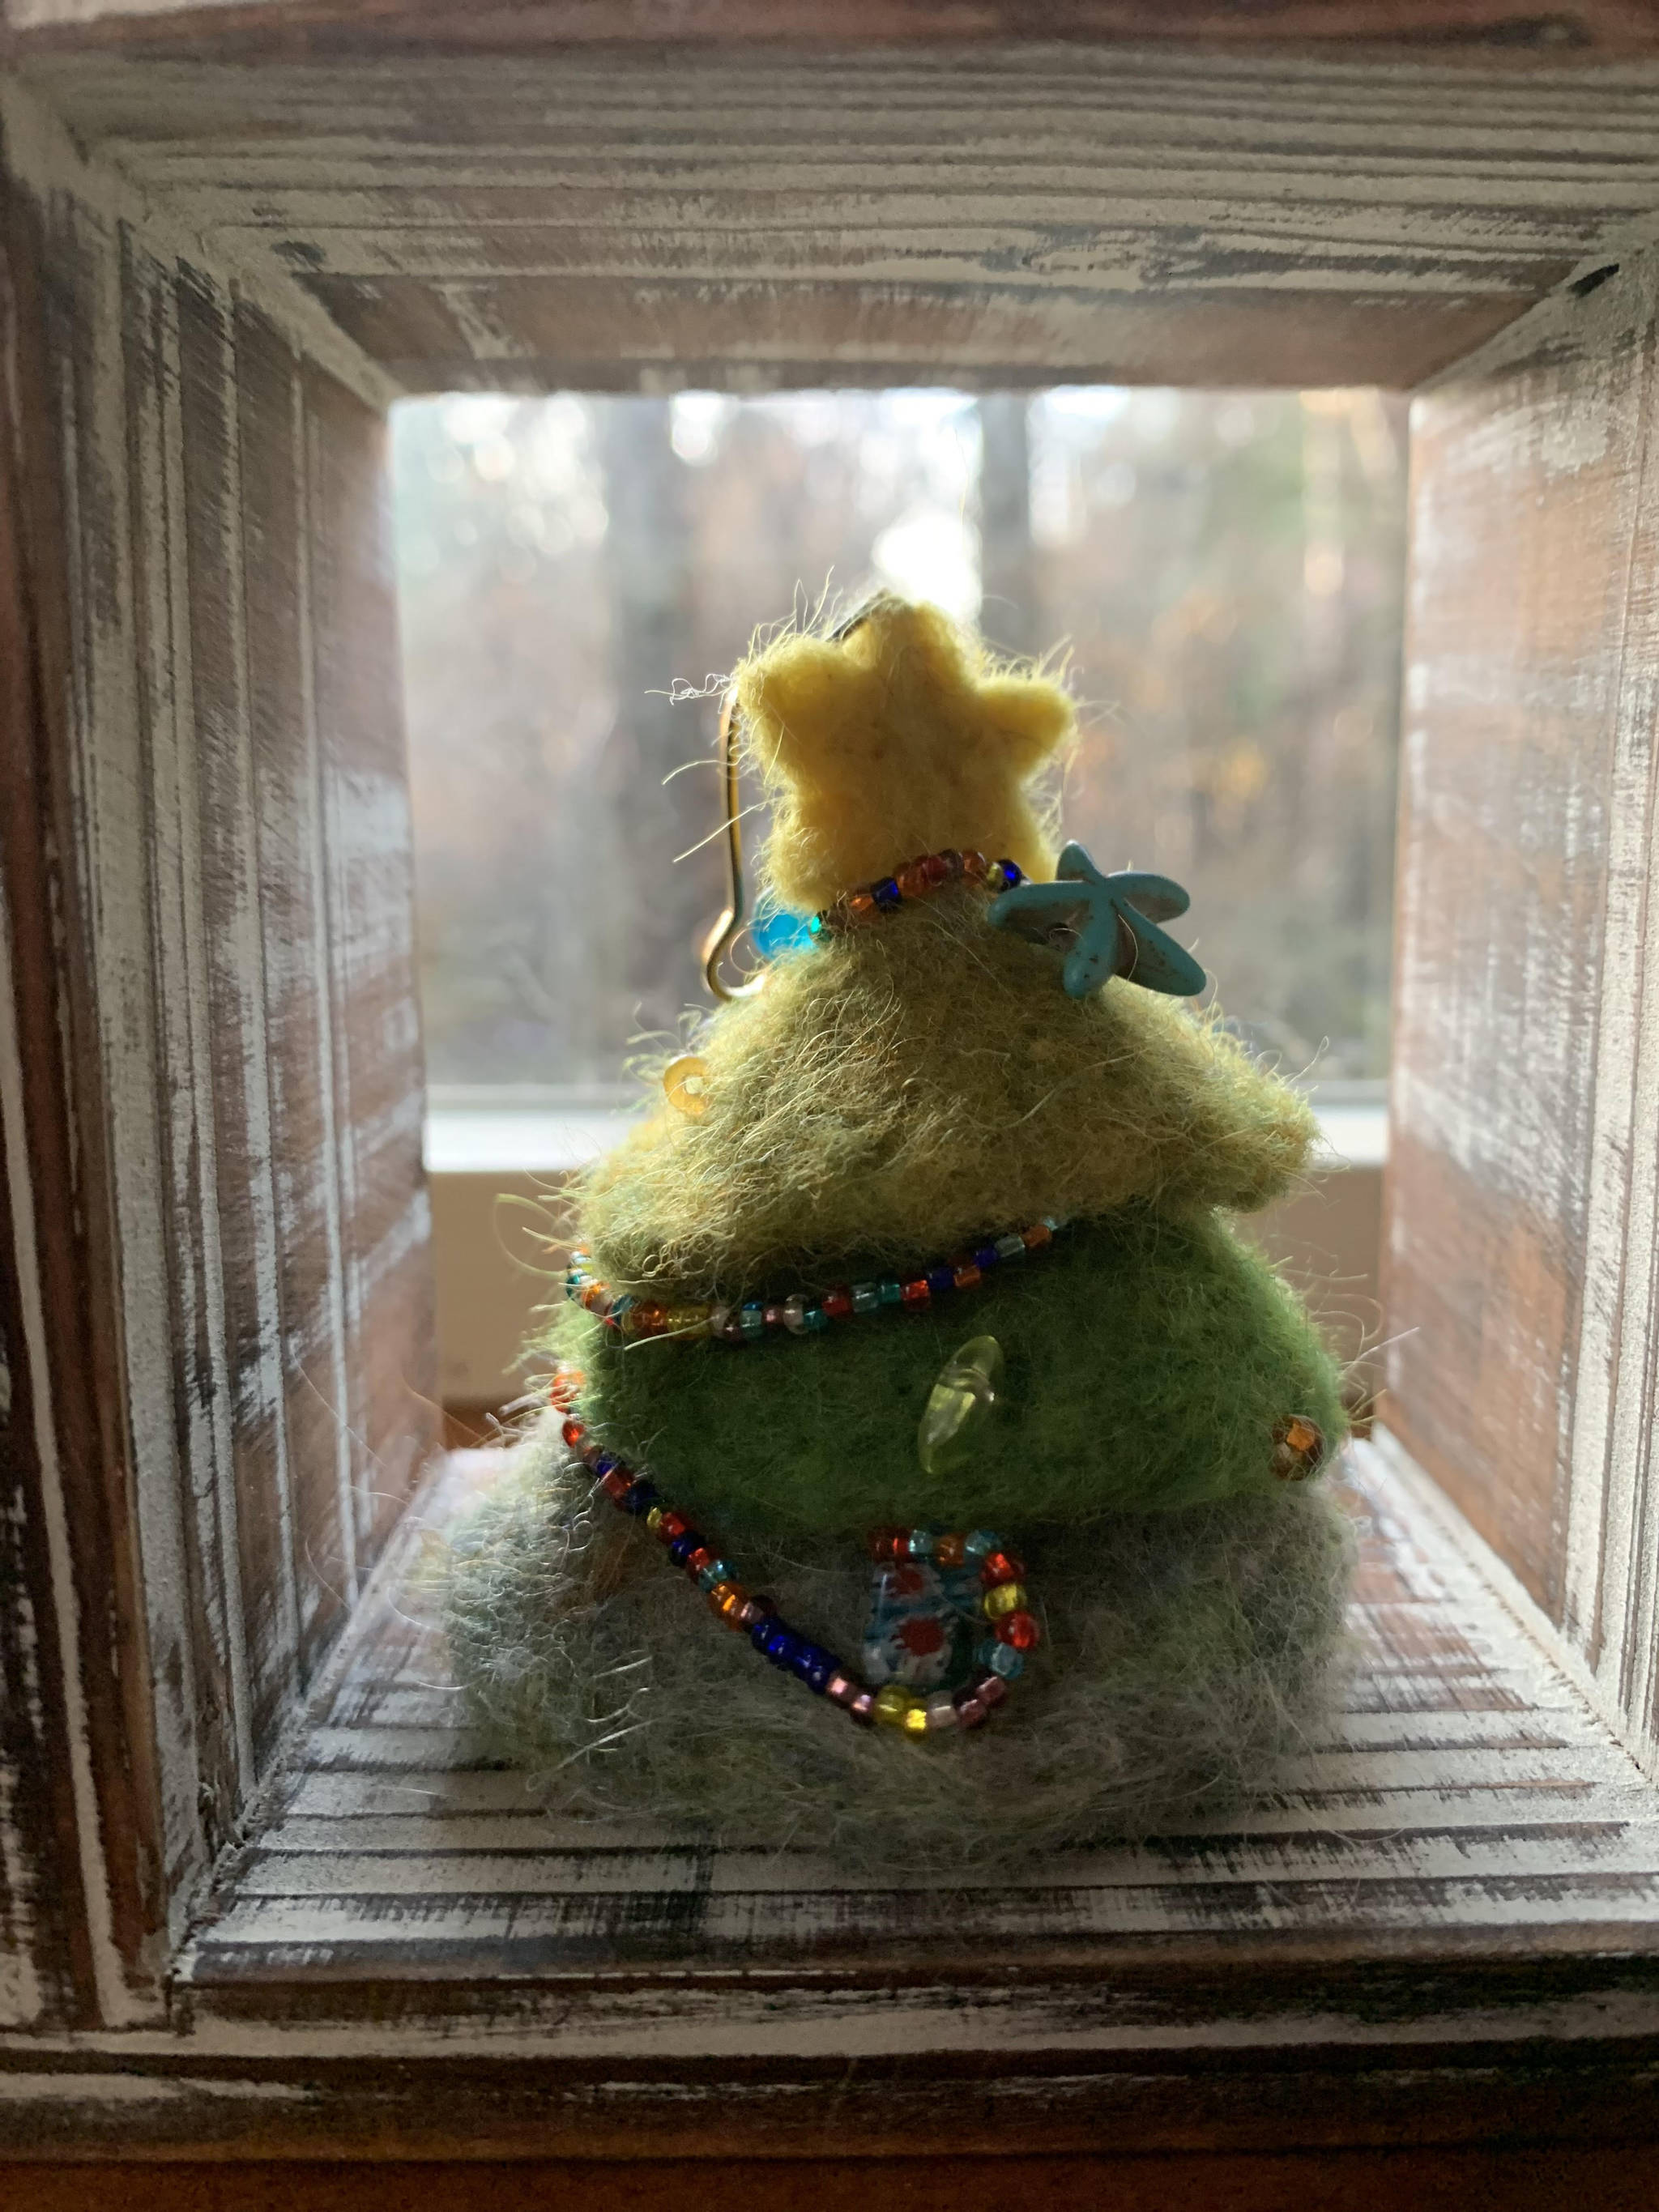 One of Hanna Young’s felted sculptures. (Photo provided)